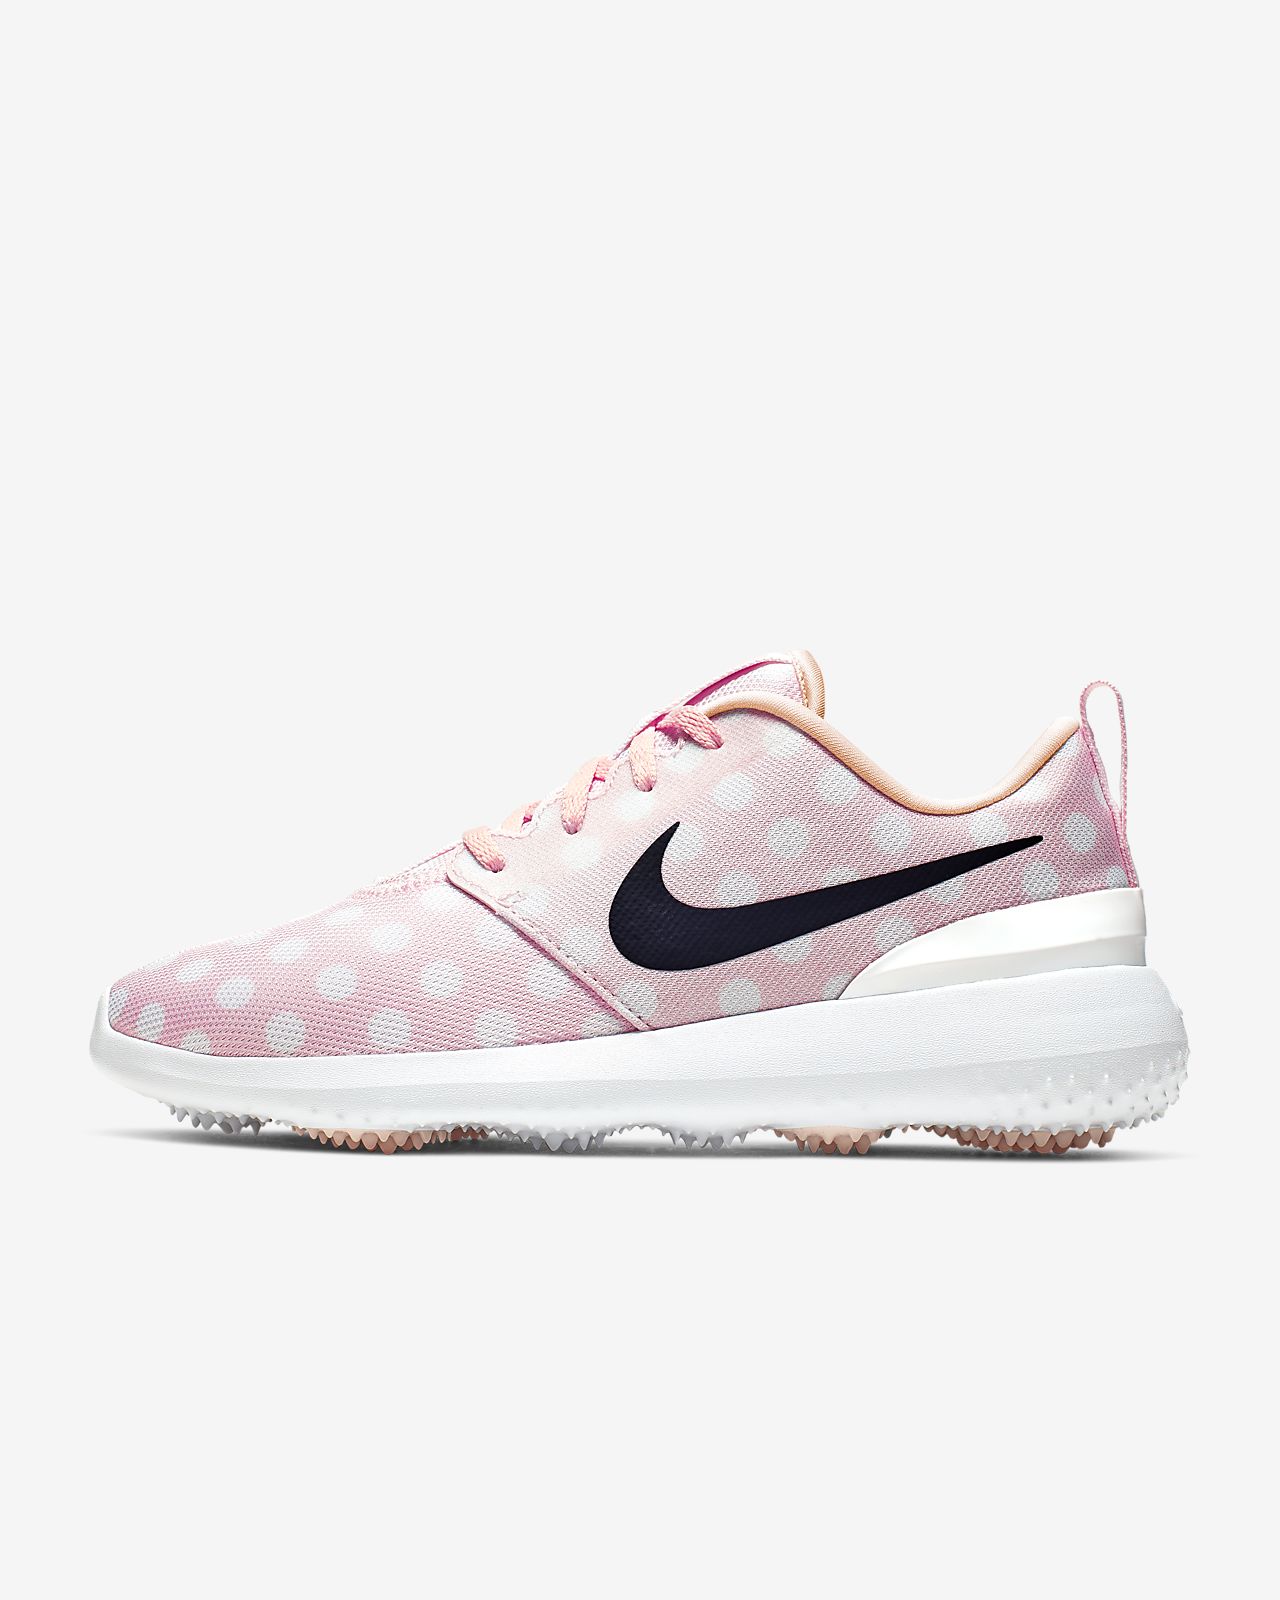 nike shoes for women roshes